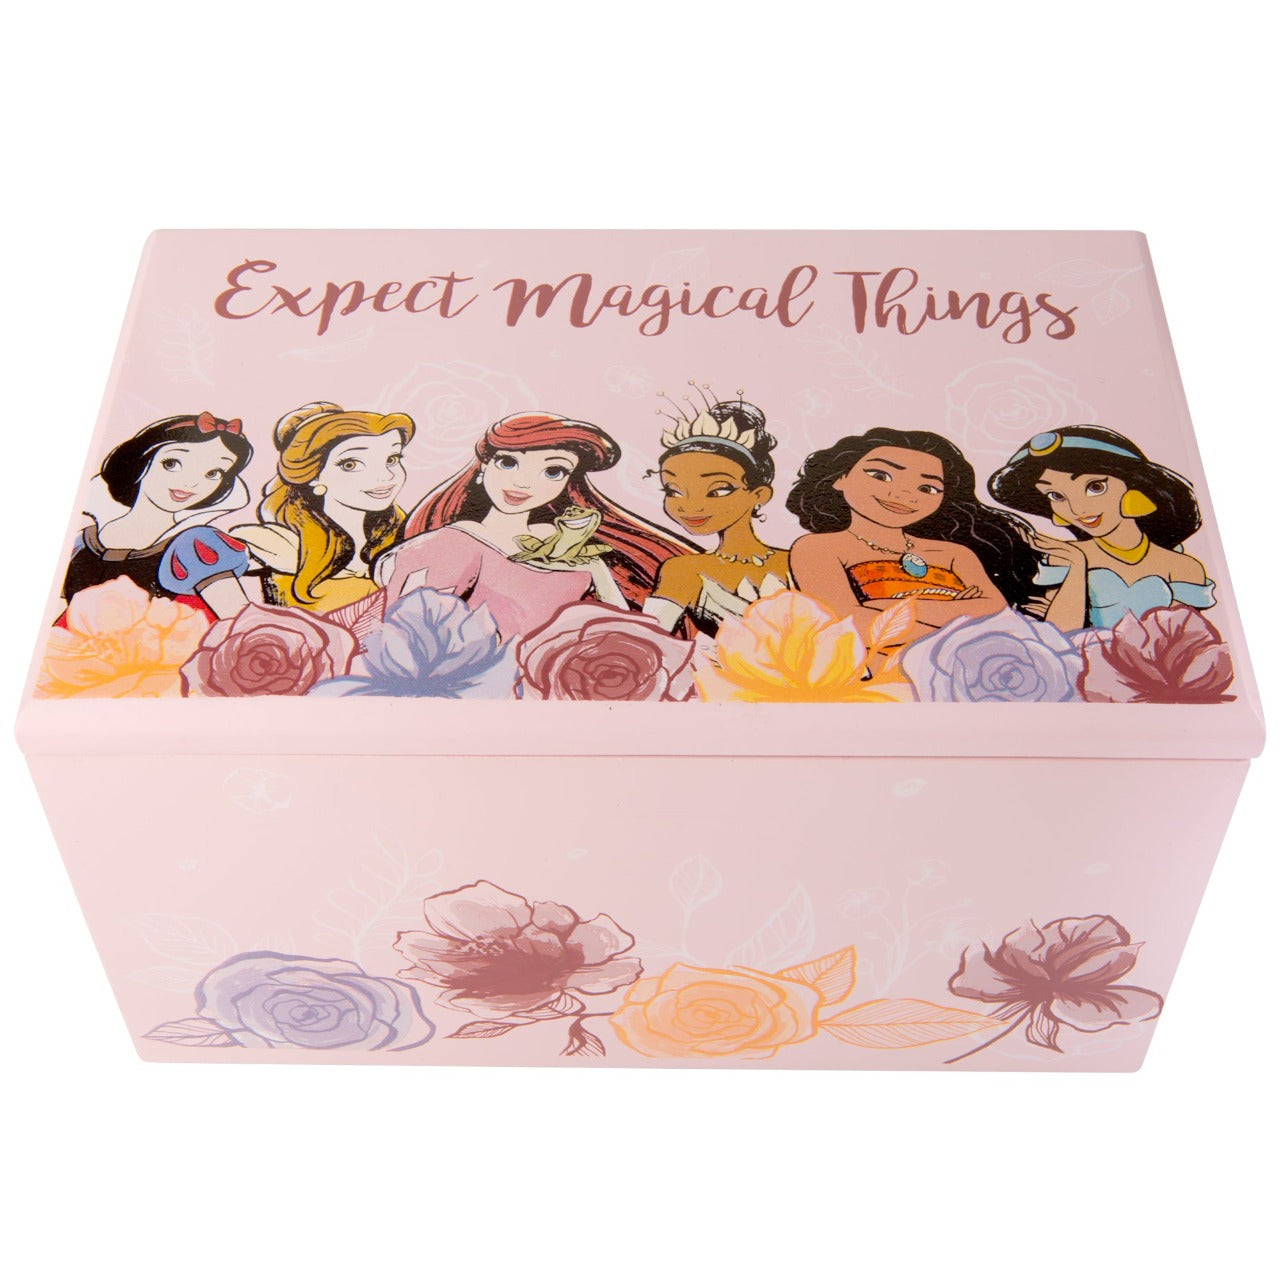 Disney Princess Wooden Jewellery Box With Hinged Lid  Official Disney Princess Jewellery box is the perfect gift for any Disney fan! This Pink  jewellery box is made with solid wood which features a hinged lid.  The Disney Collection features favourite characters from cult classics. There is something for every Disney fan no matter their age. Disney Princess and Beauty And The Beast collections are also available.